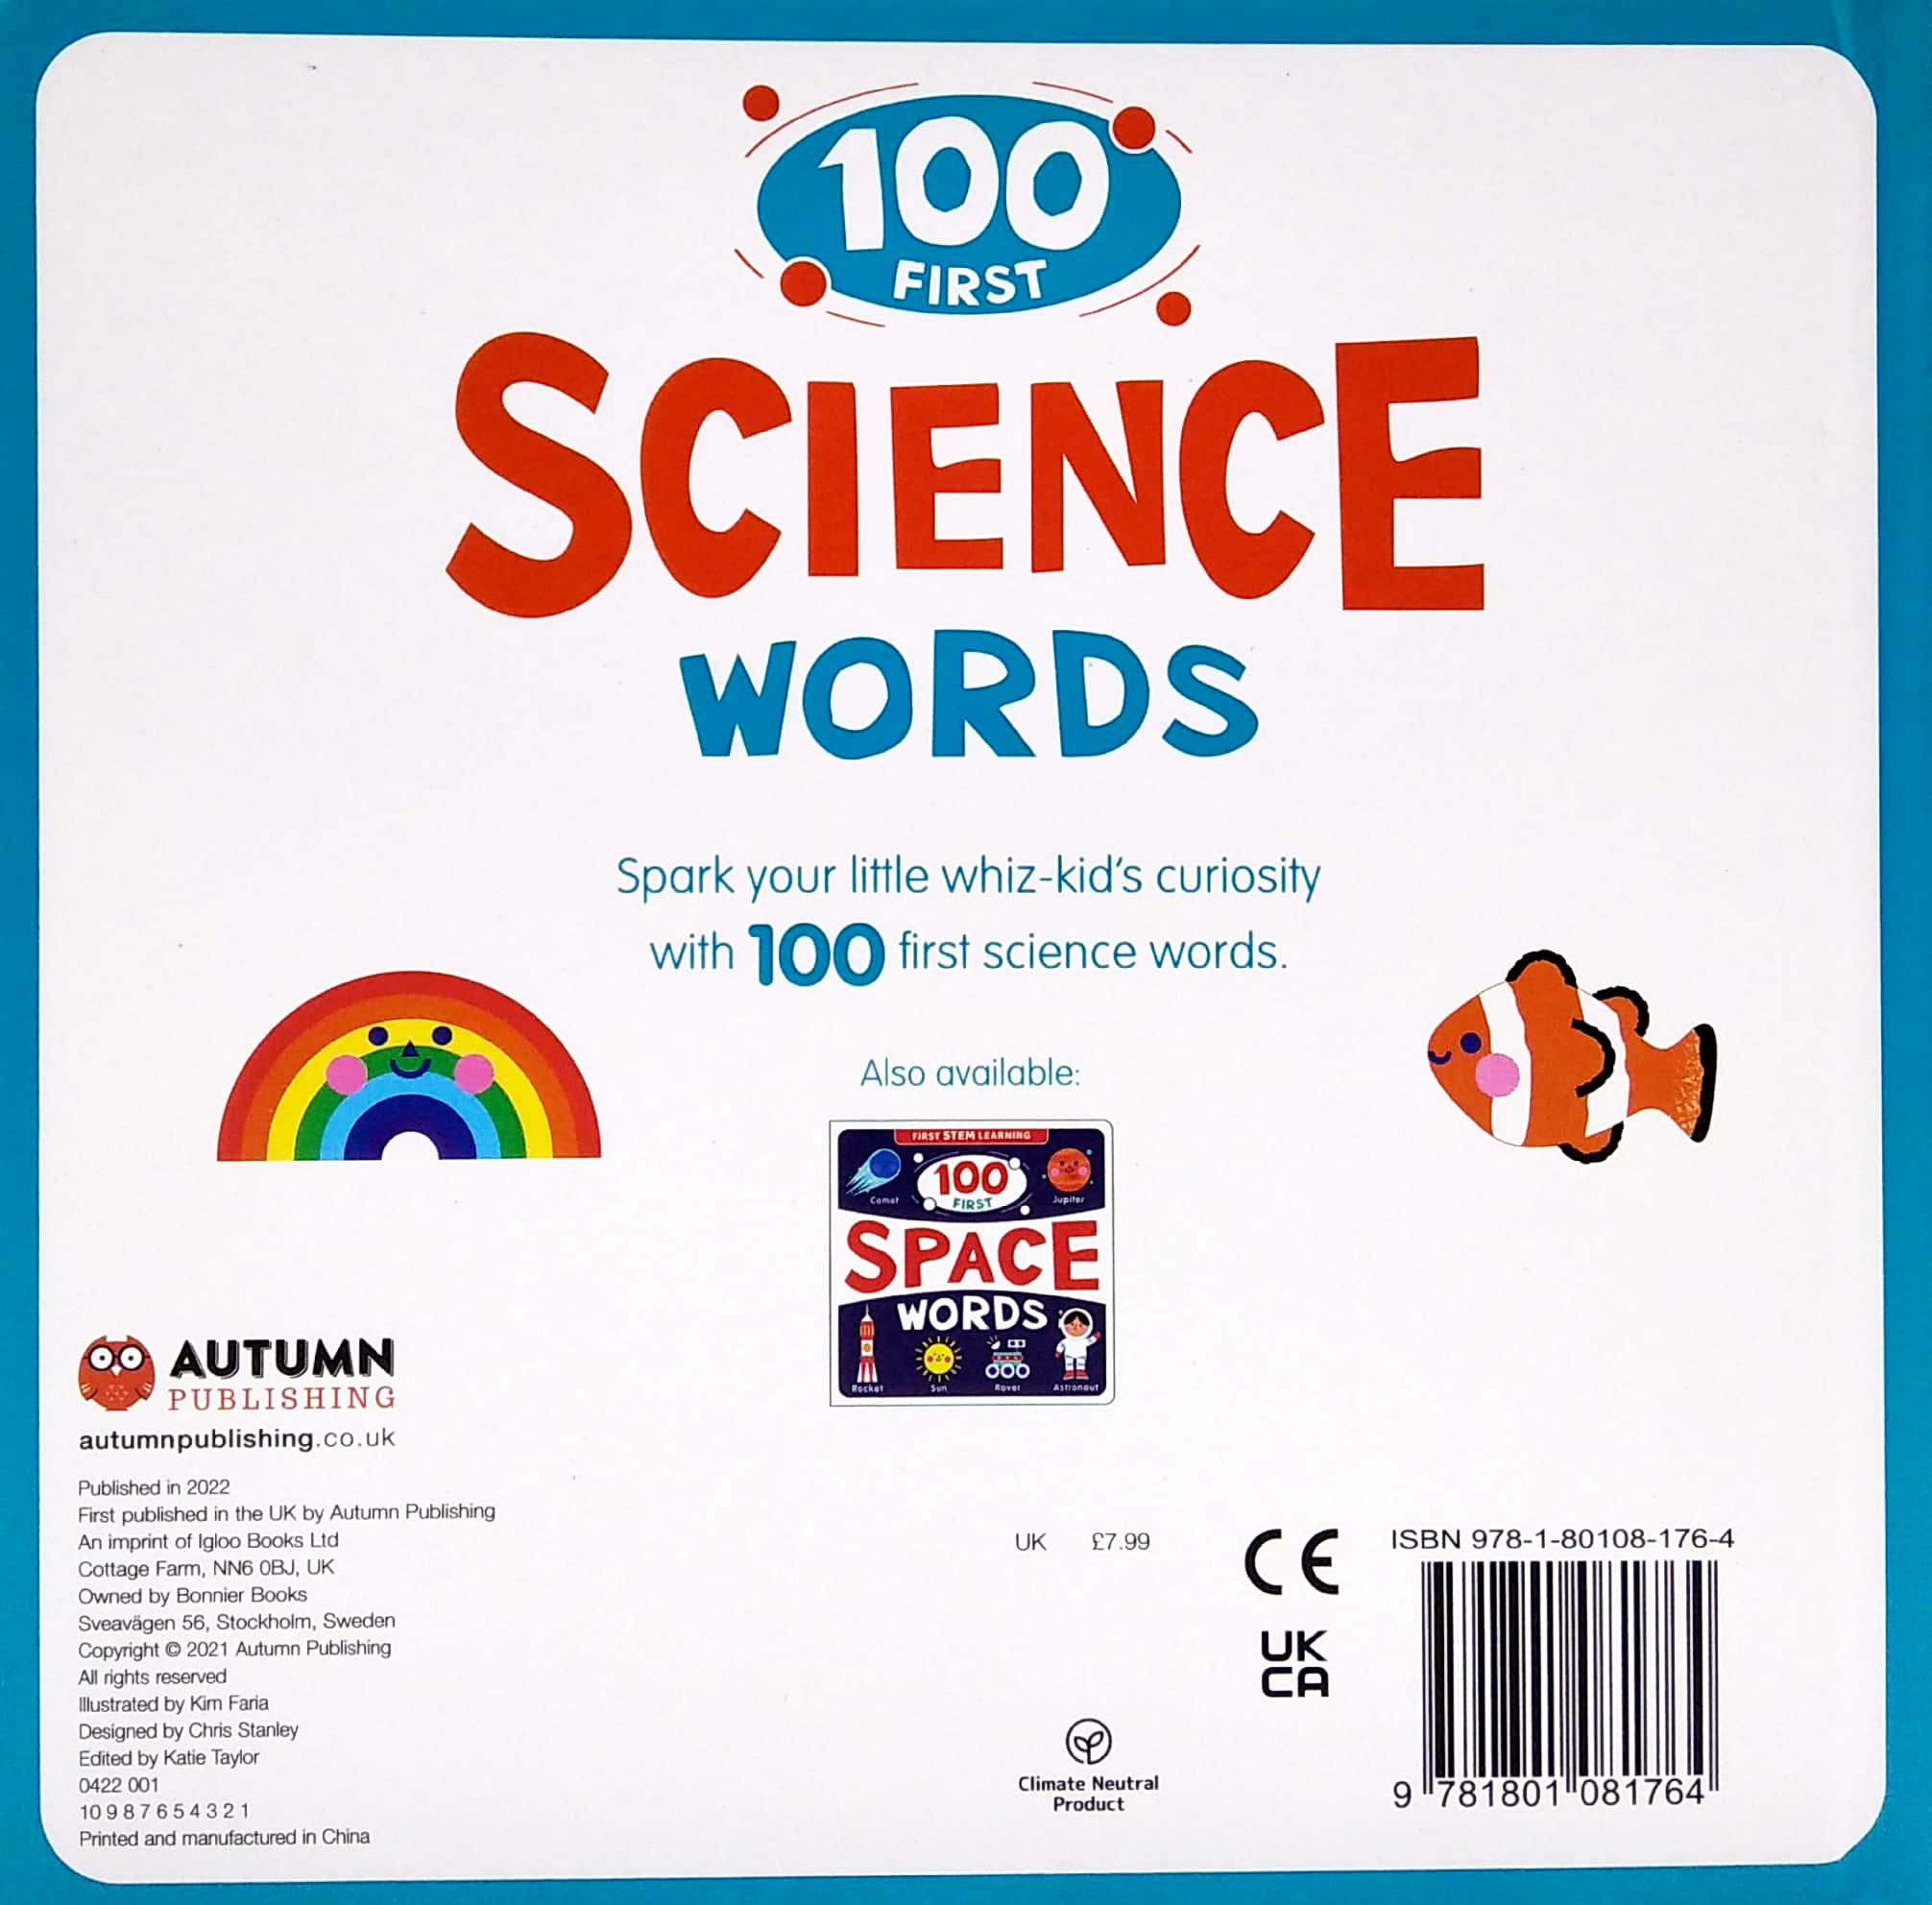 First STEM Learning: 100 First Science Words